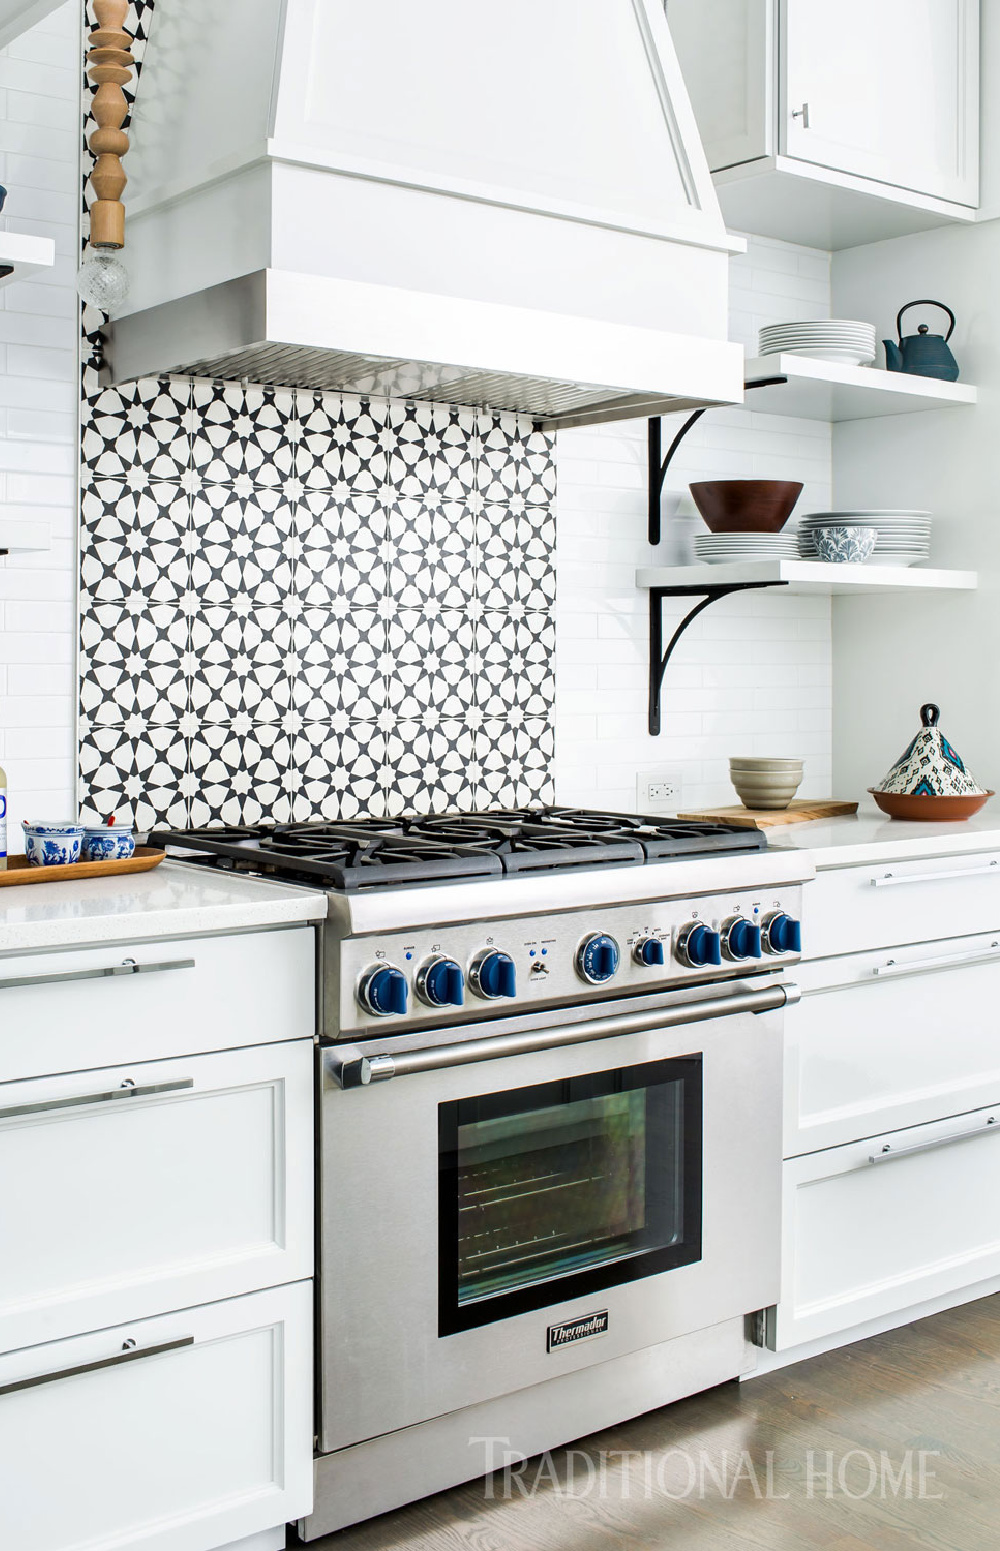 The custom vent hood above the Thermador range is mostly wood with a band of stainless steel closest to the heat. The patterned concrete backsplash tiles have color that goes all the way through. Come see 36 Best Beautiful Blue and White Kitchens to Love! #blueandwhite #bluekitchen #kitchendesign #kitchendecor #decorinspiration #beautifulkitchen